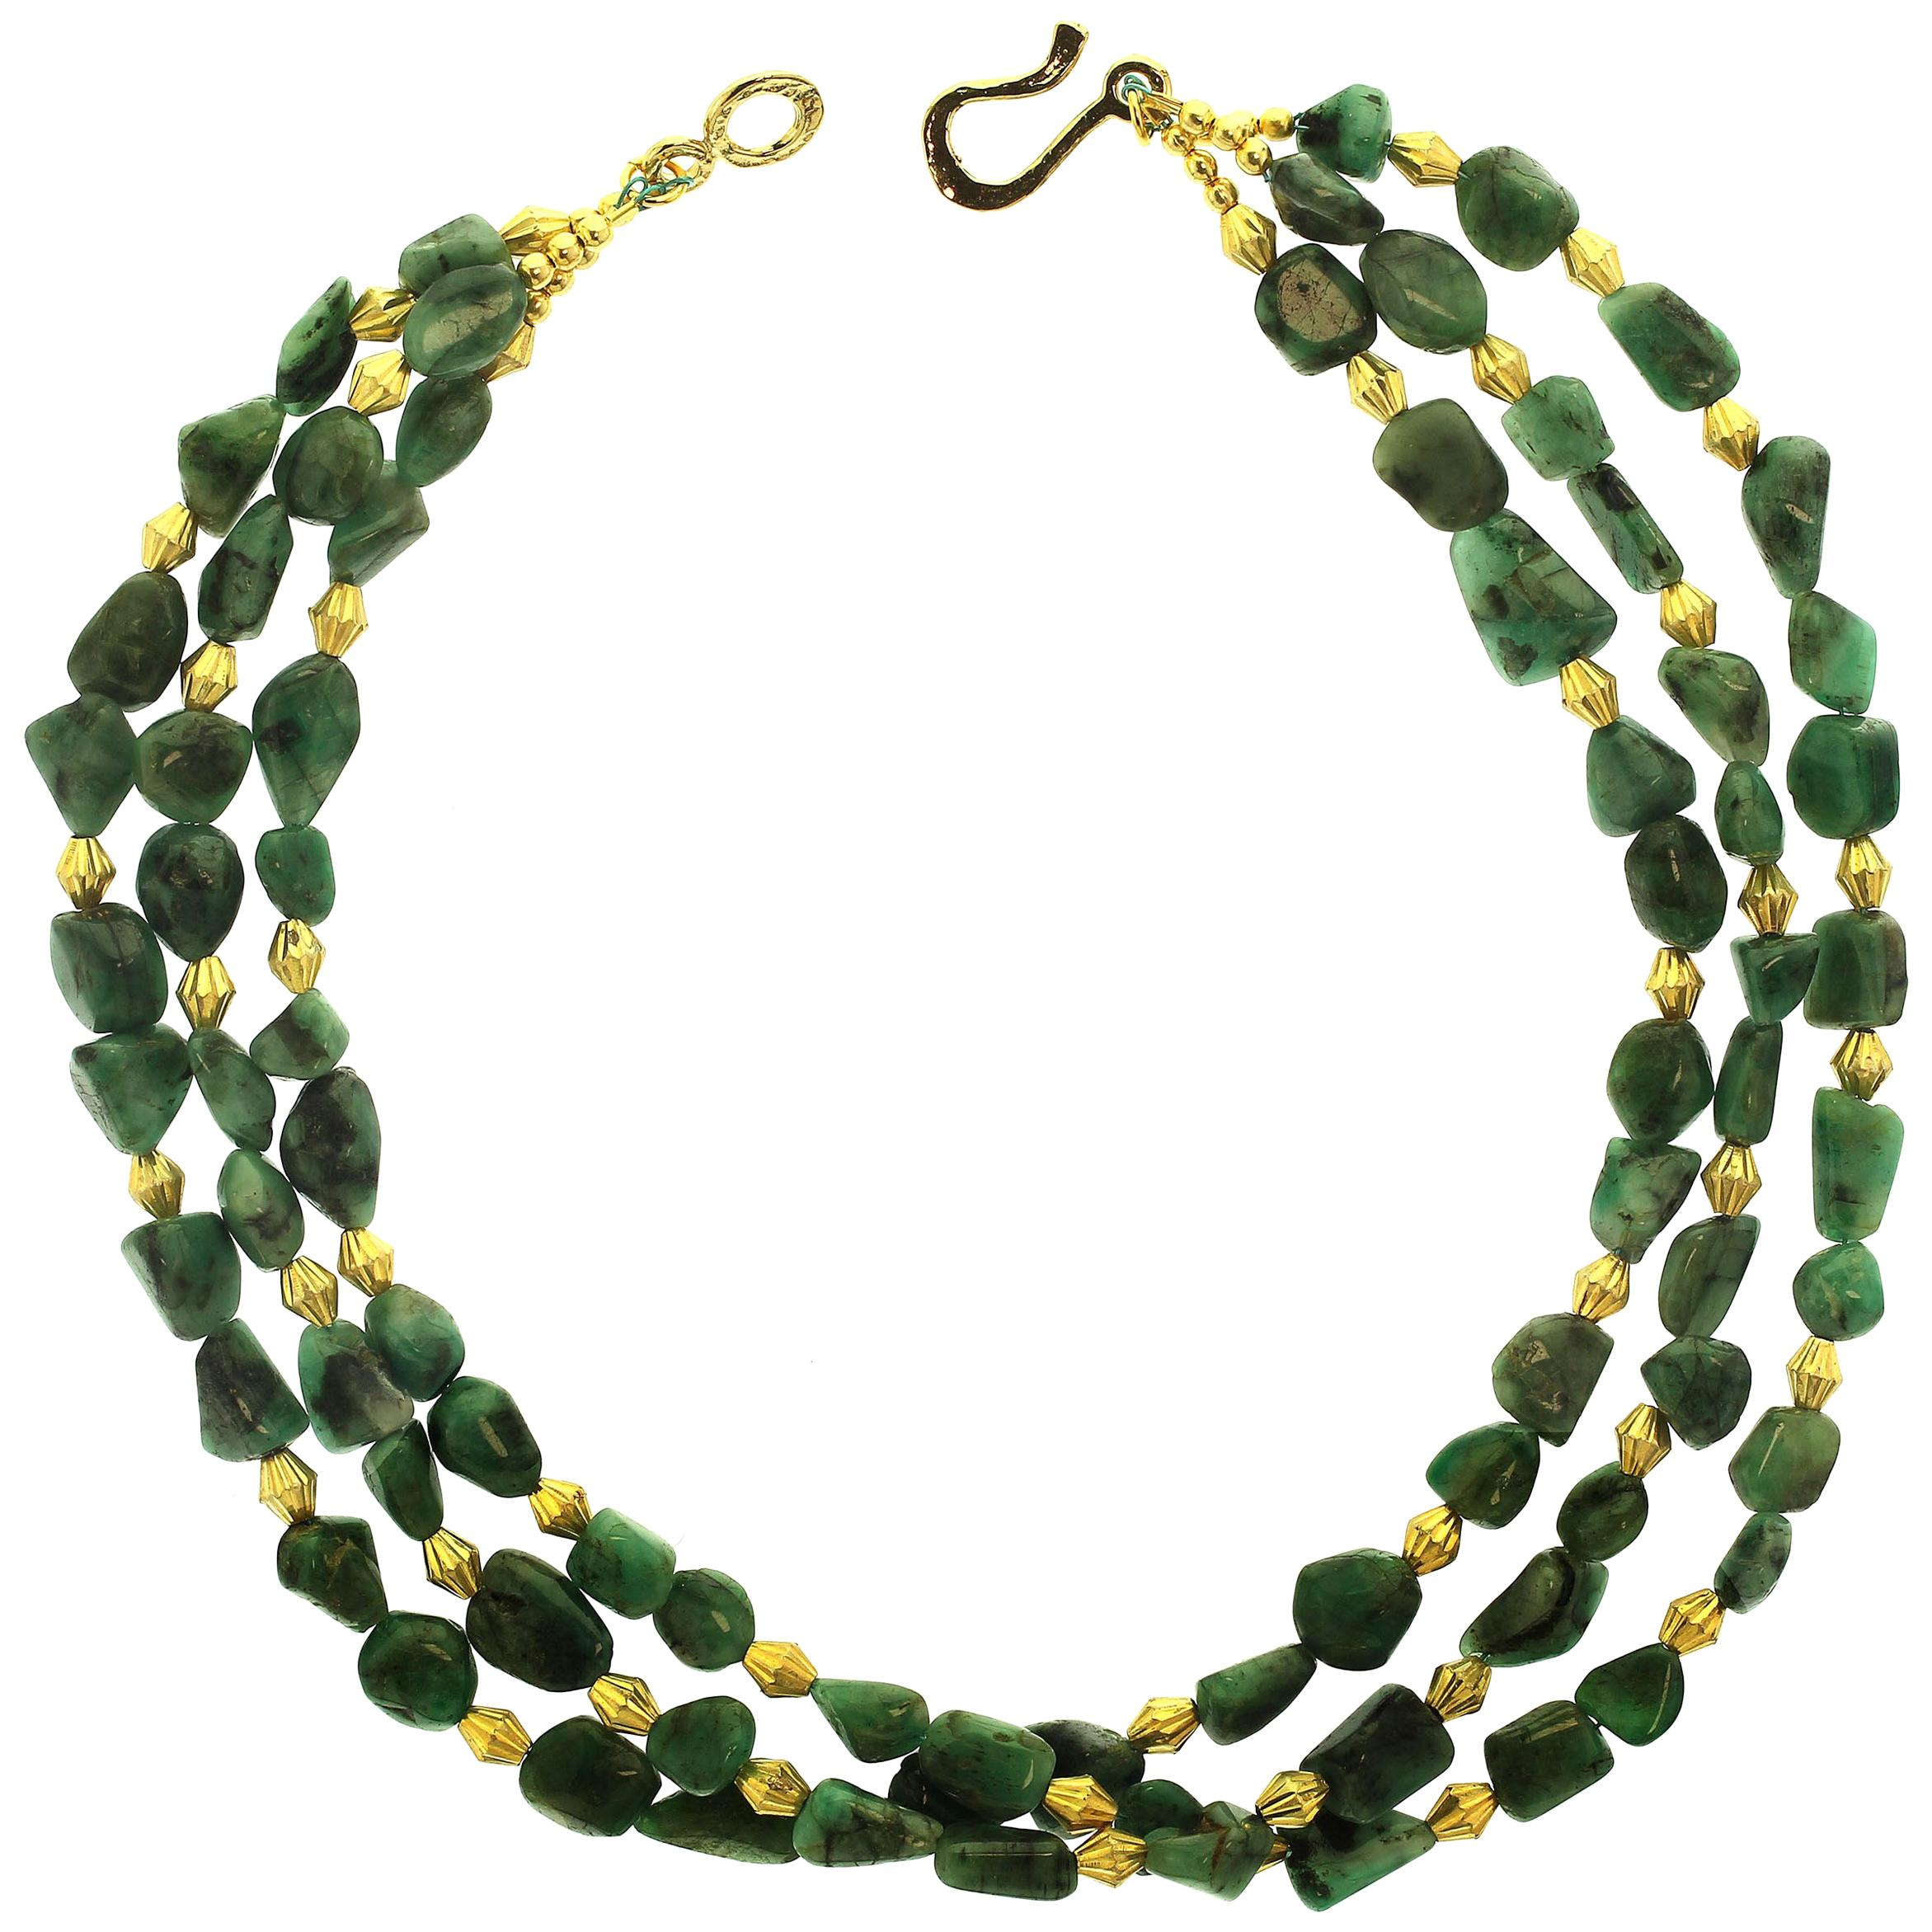 Choker necklace of three strand highly polished Emerald matrix nuggets with gold tone accents. This  necklace is approximately 14 inches in length worn as a choker. These Emerald in matrix nuggets are a variety of shapes and sizes and a lovely warm